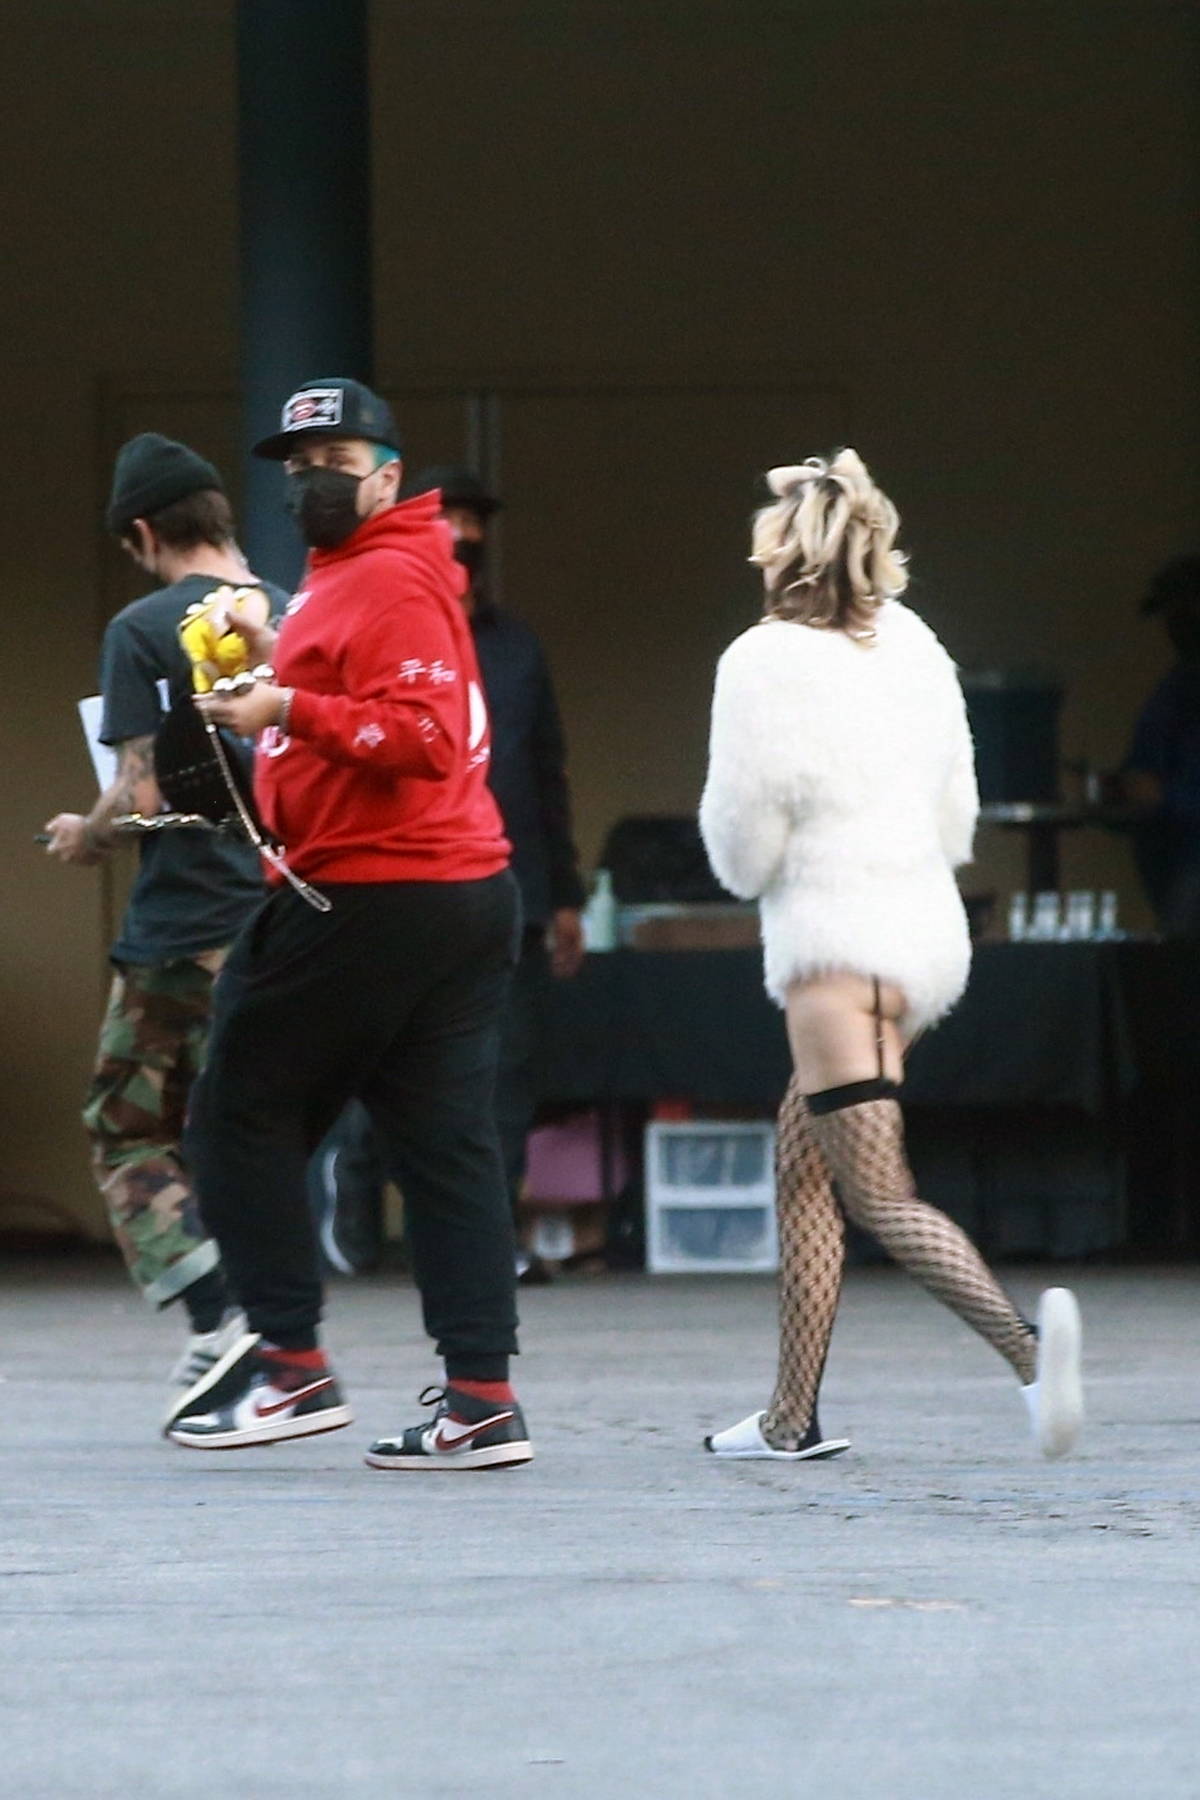 Spotted: Miley Cyrus Wears Furry Boy Shorts And Thigh-Highs